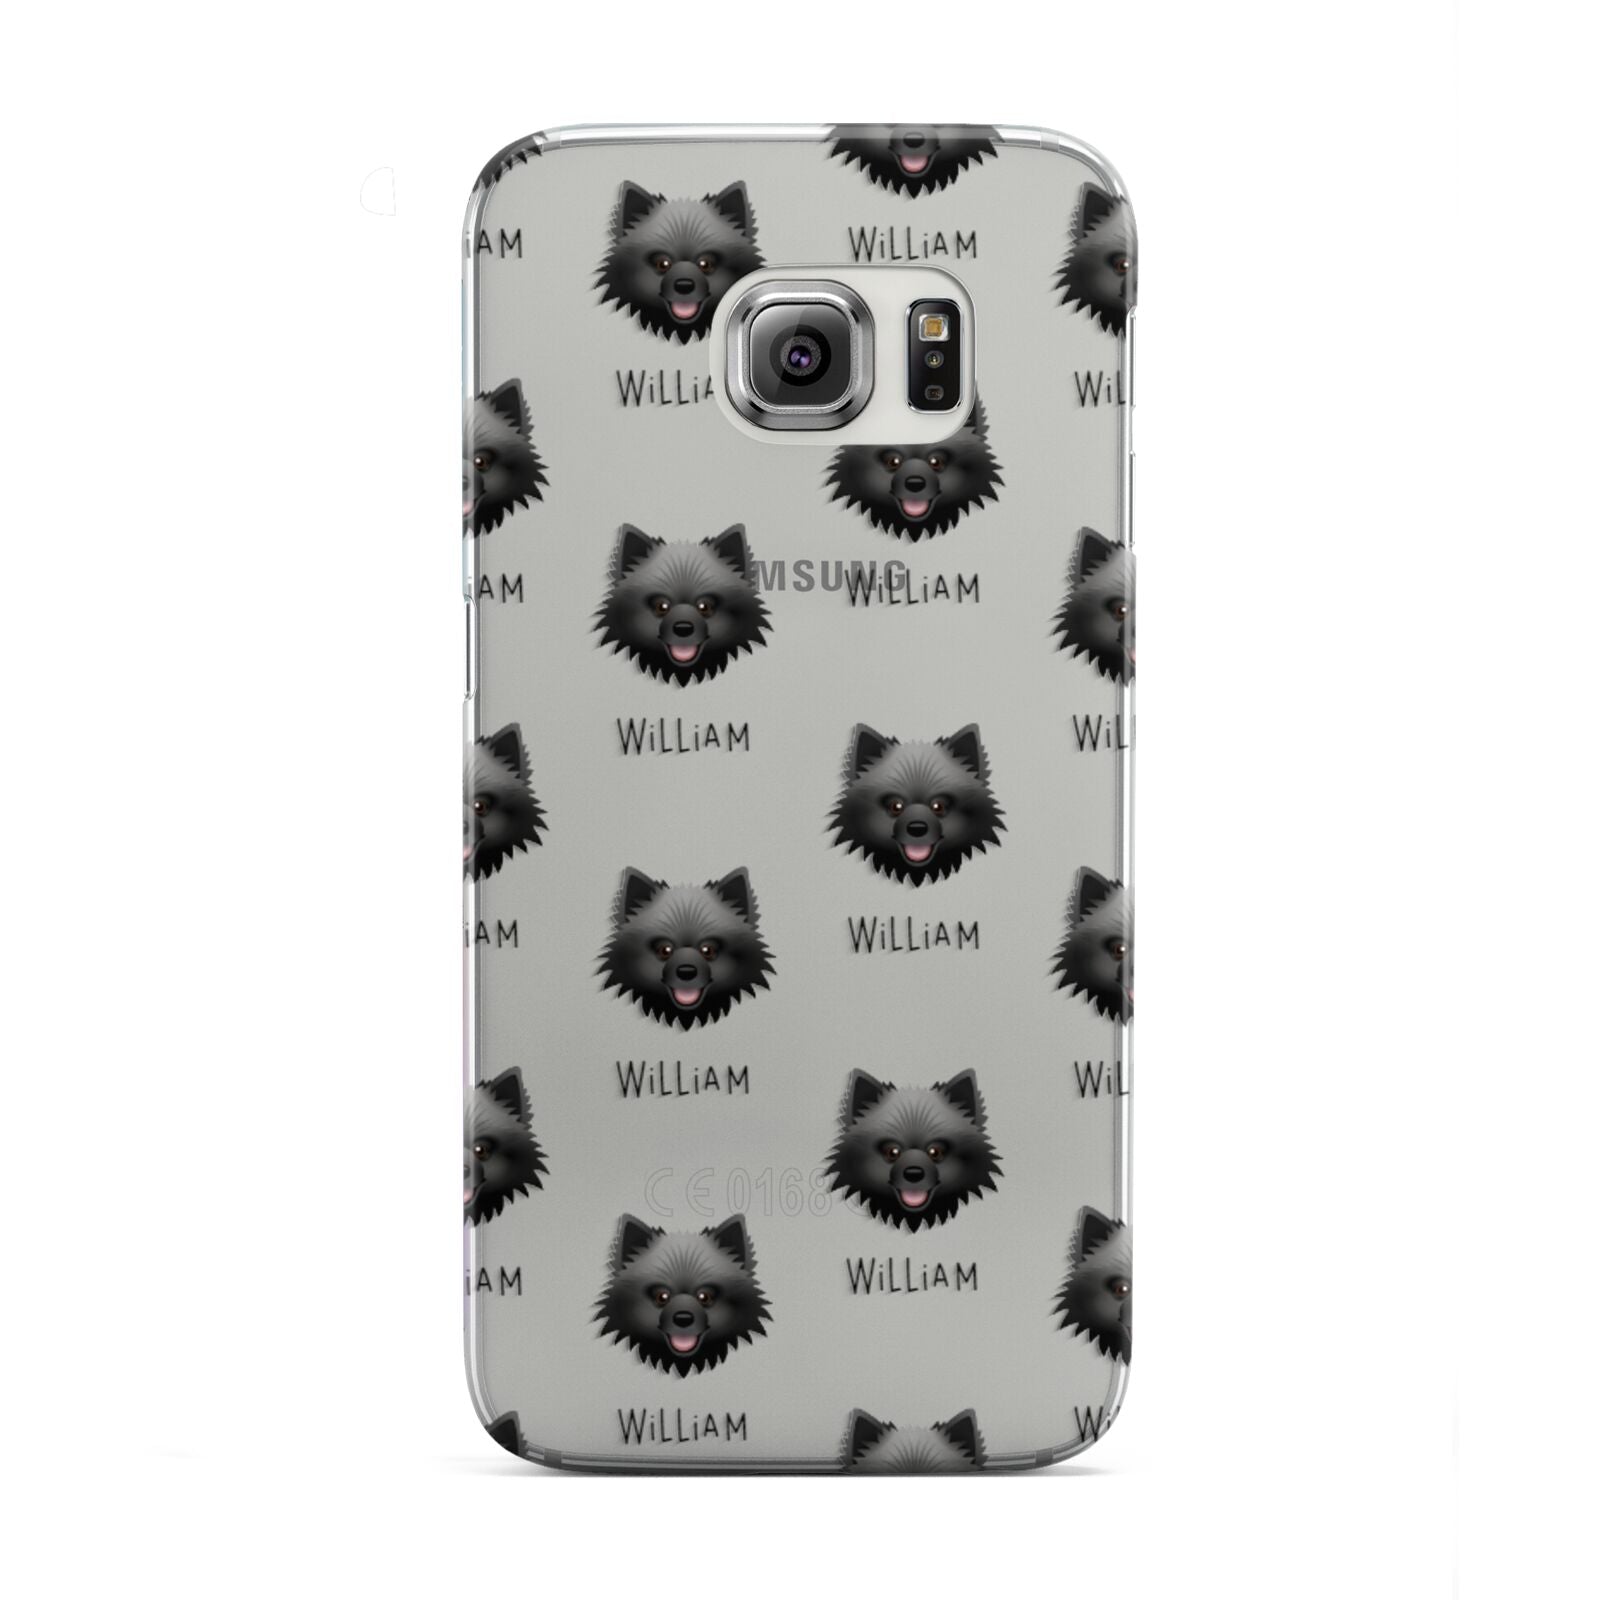 Keeshond Icon with Name Samsung Galaxy S6 Edge Case